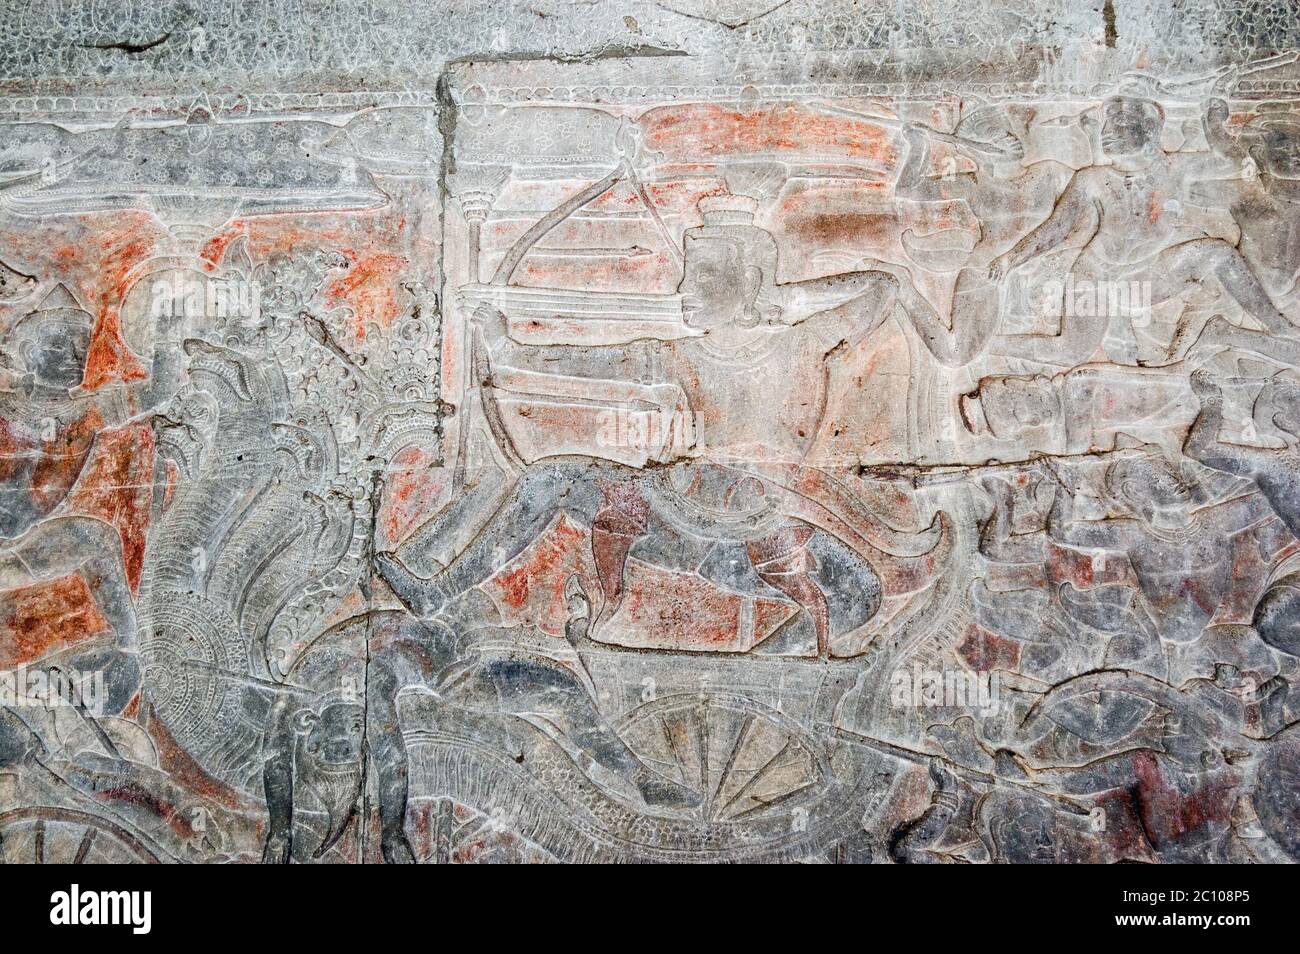 Ancient Khmer bas relief carving showing the Hindu god Shiva firing an arrow from a chariot pulled by a Naga - a many headed snake god. Wall of Angkor Stock Photo